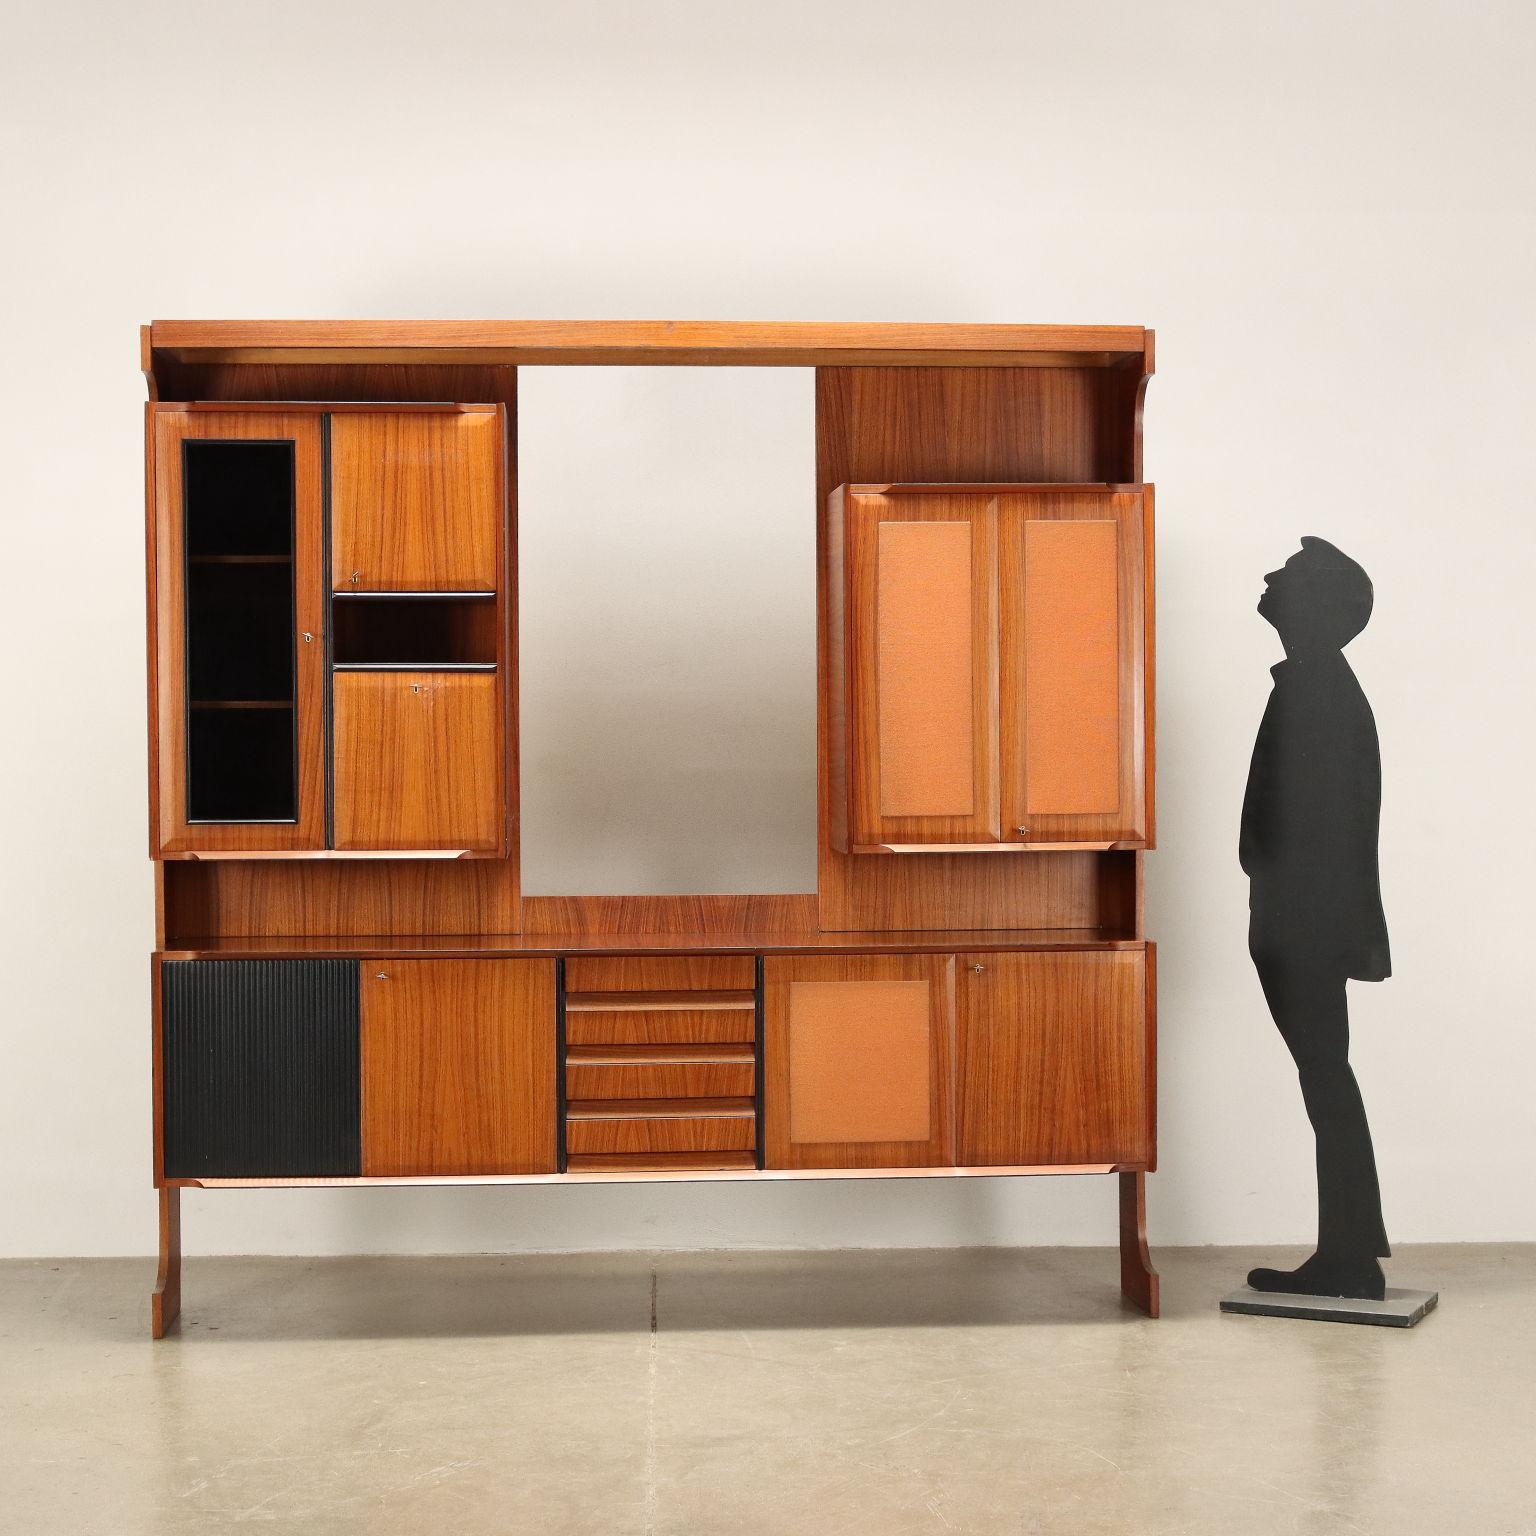 Cabinet with hinged doors and flap doors. Rosewood veneered wood, glass, panels covered in fabric and 